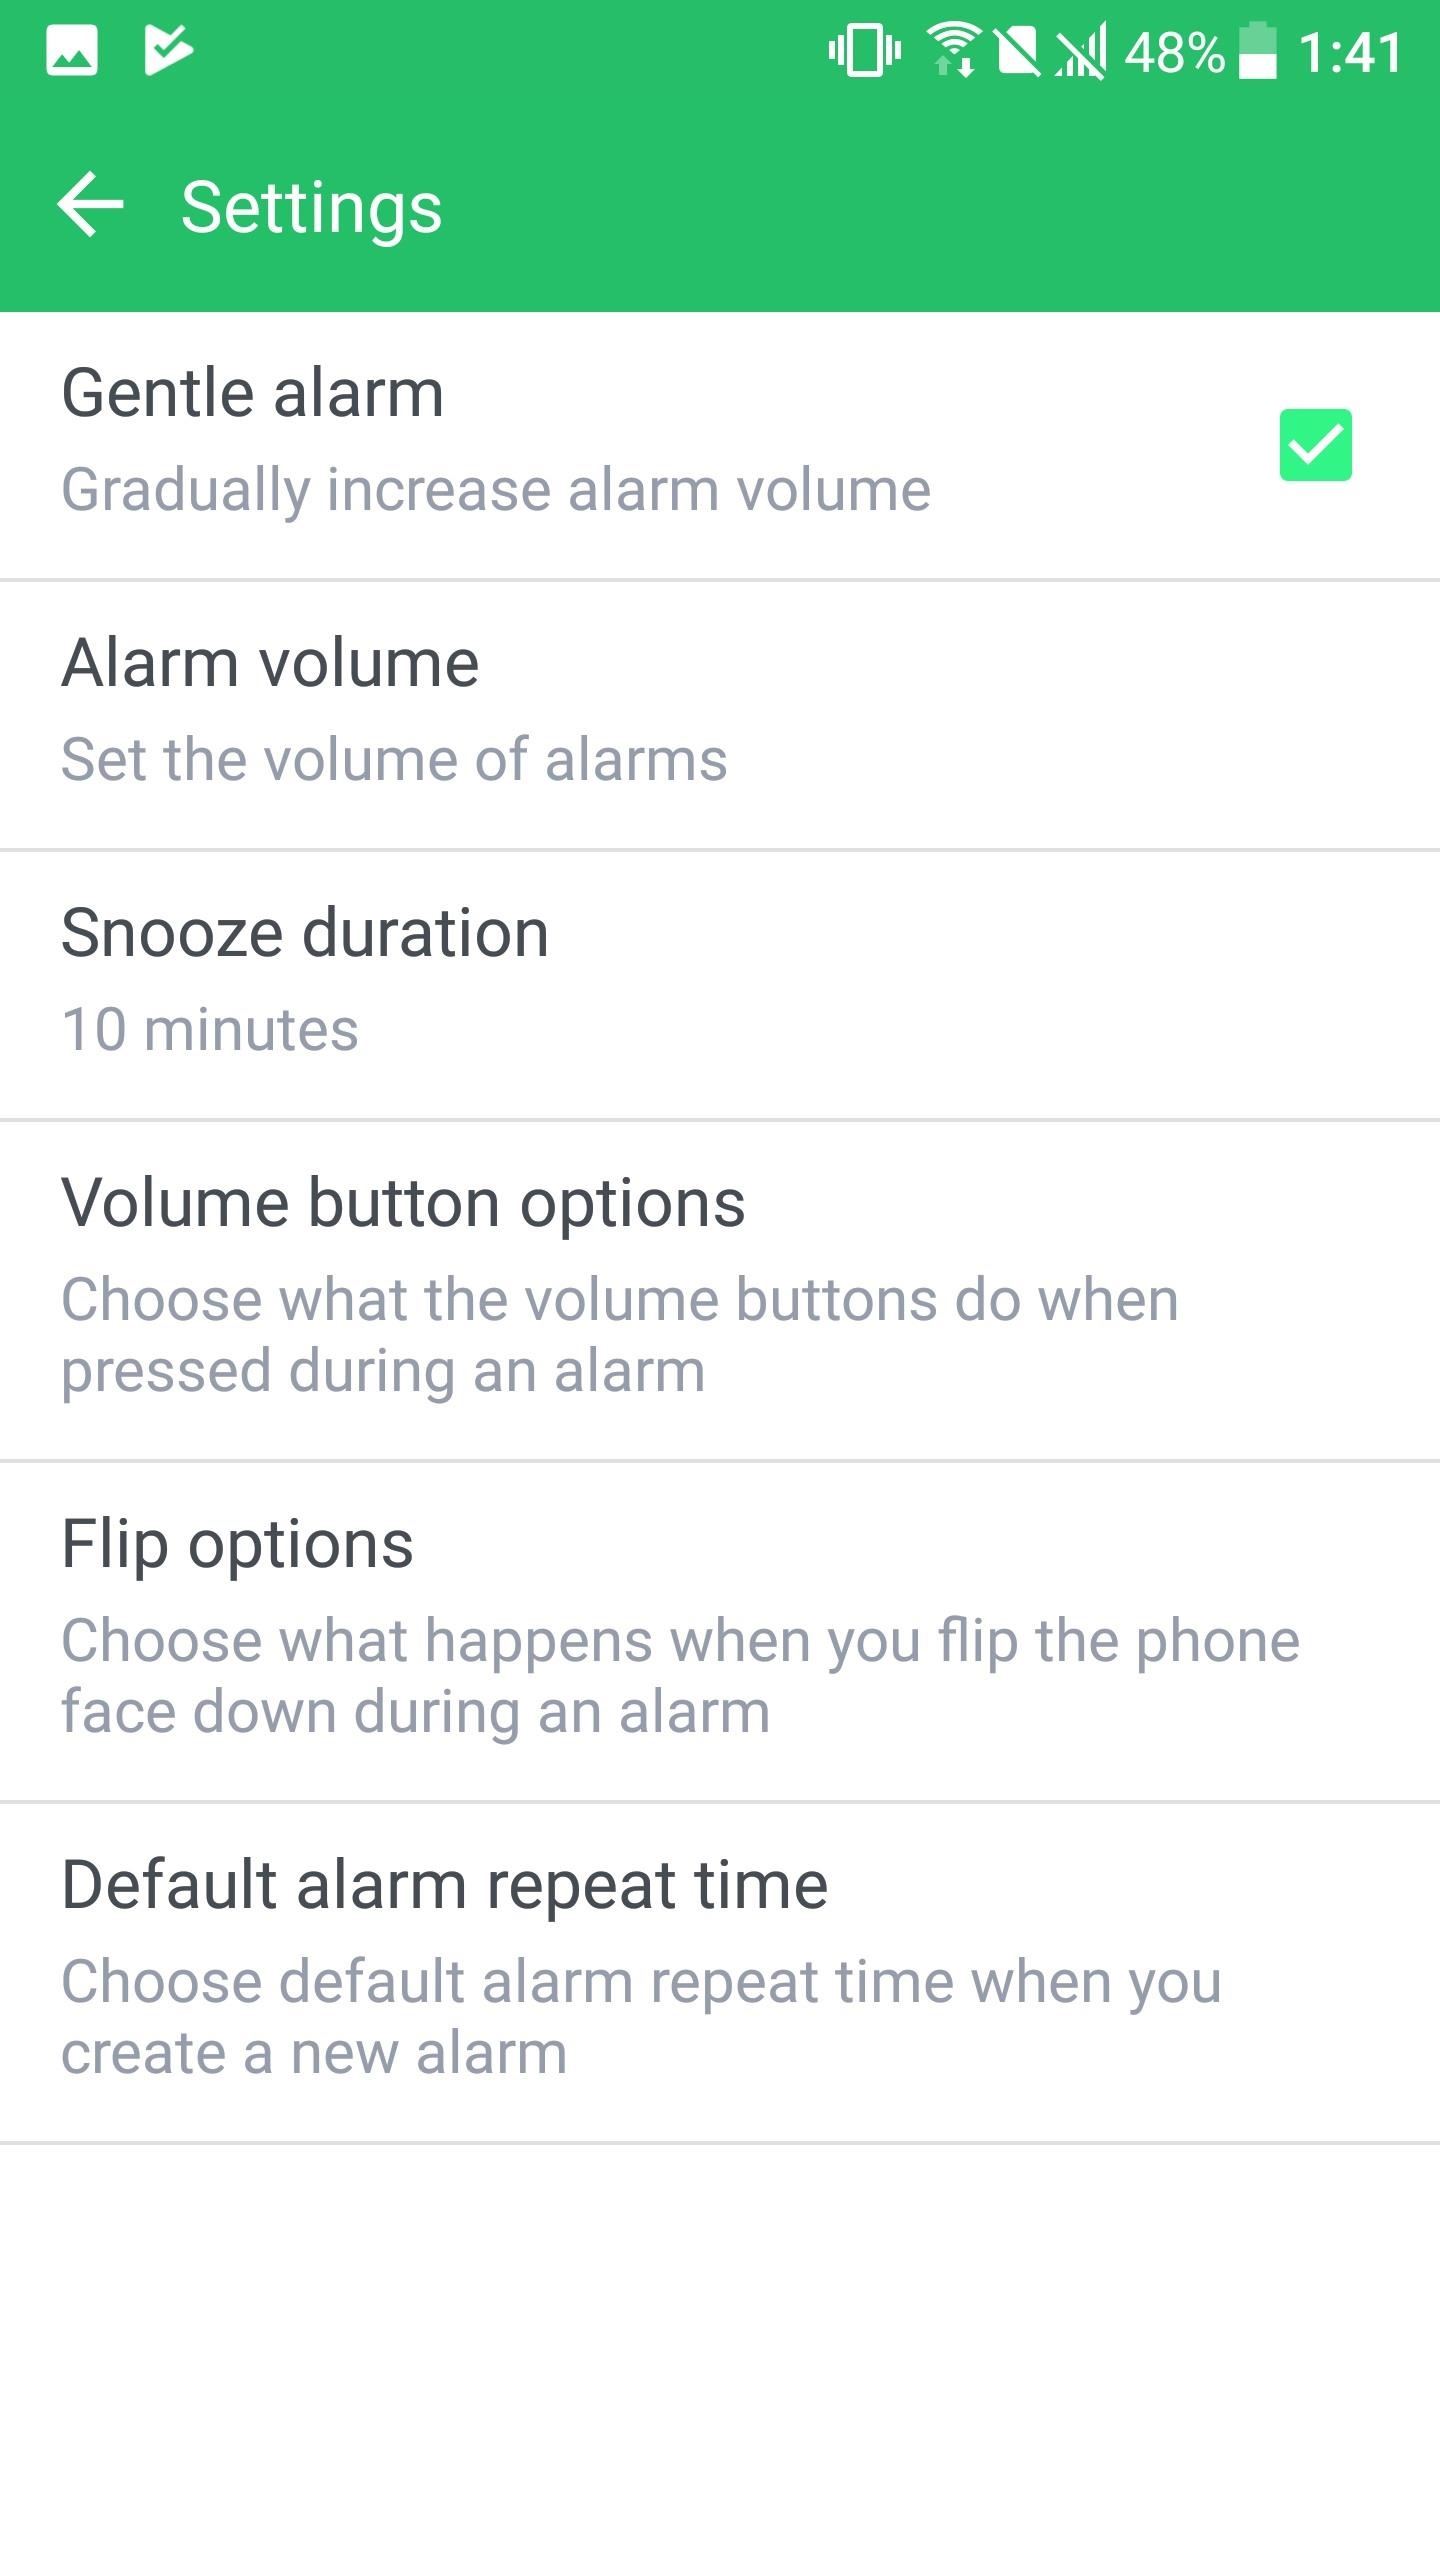 How to Change the Default Snooze Time for Your Alarm on Any Android